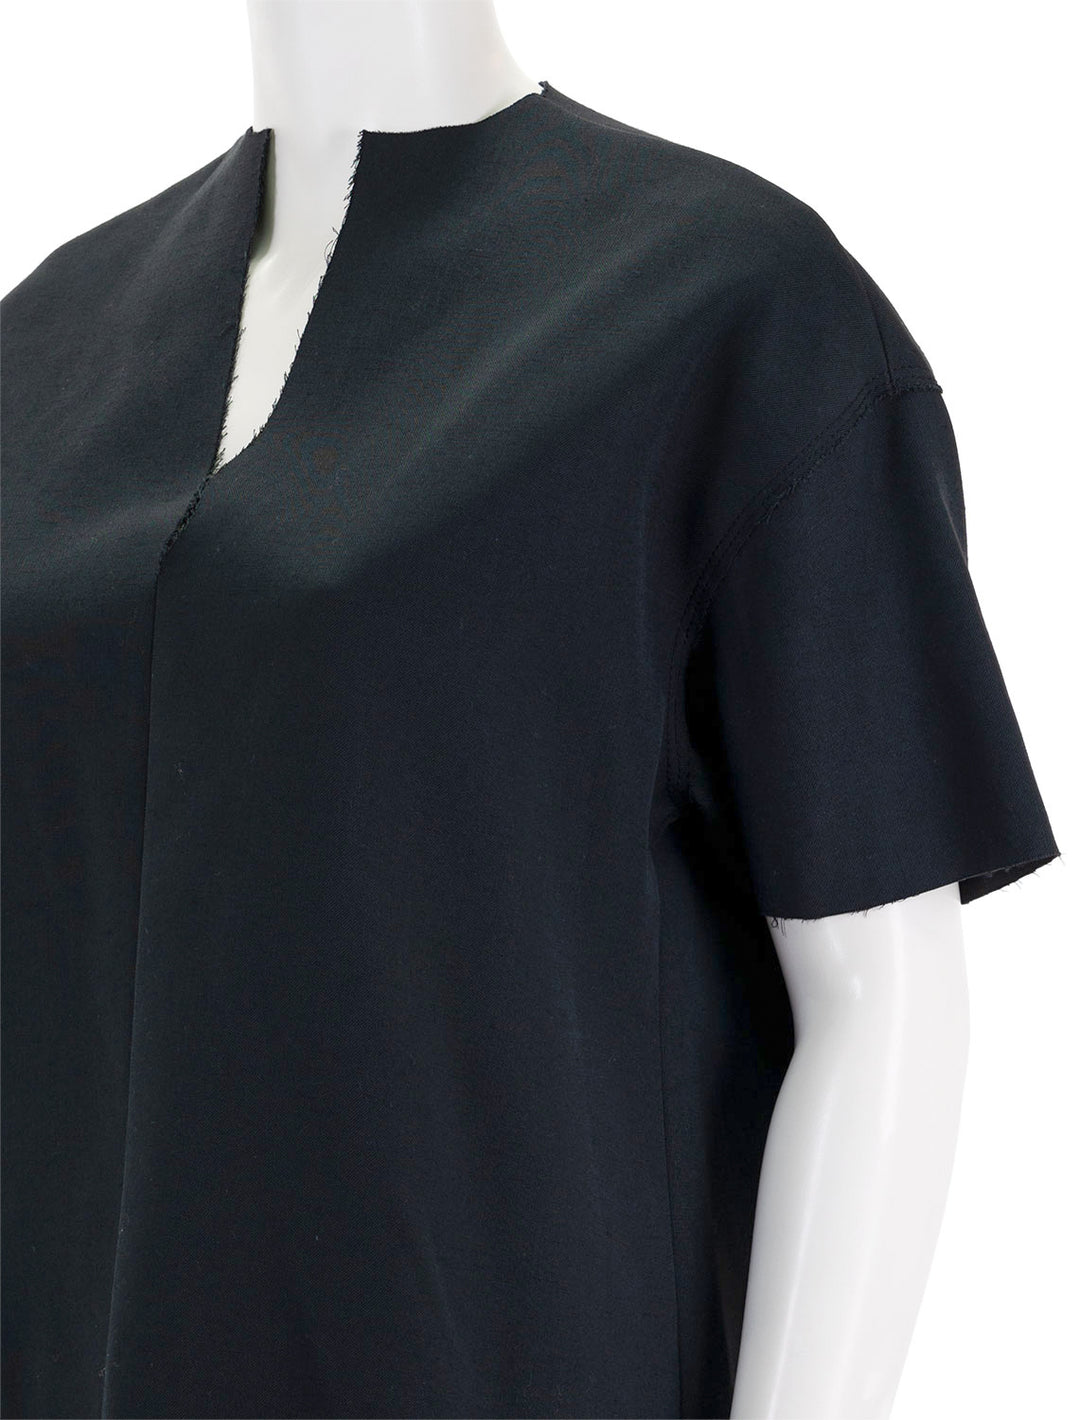 Close-up view of STAUD's amigoni top in black.